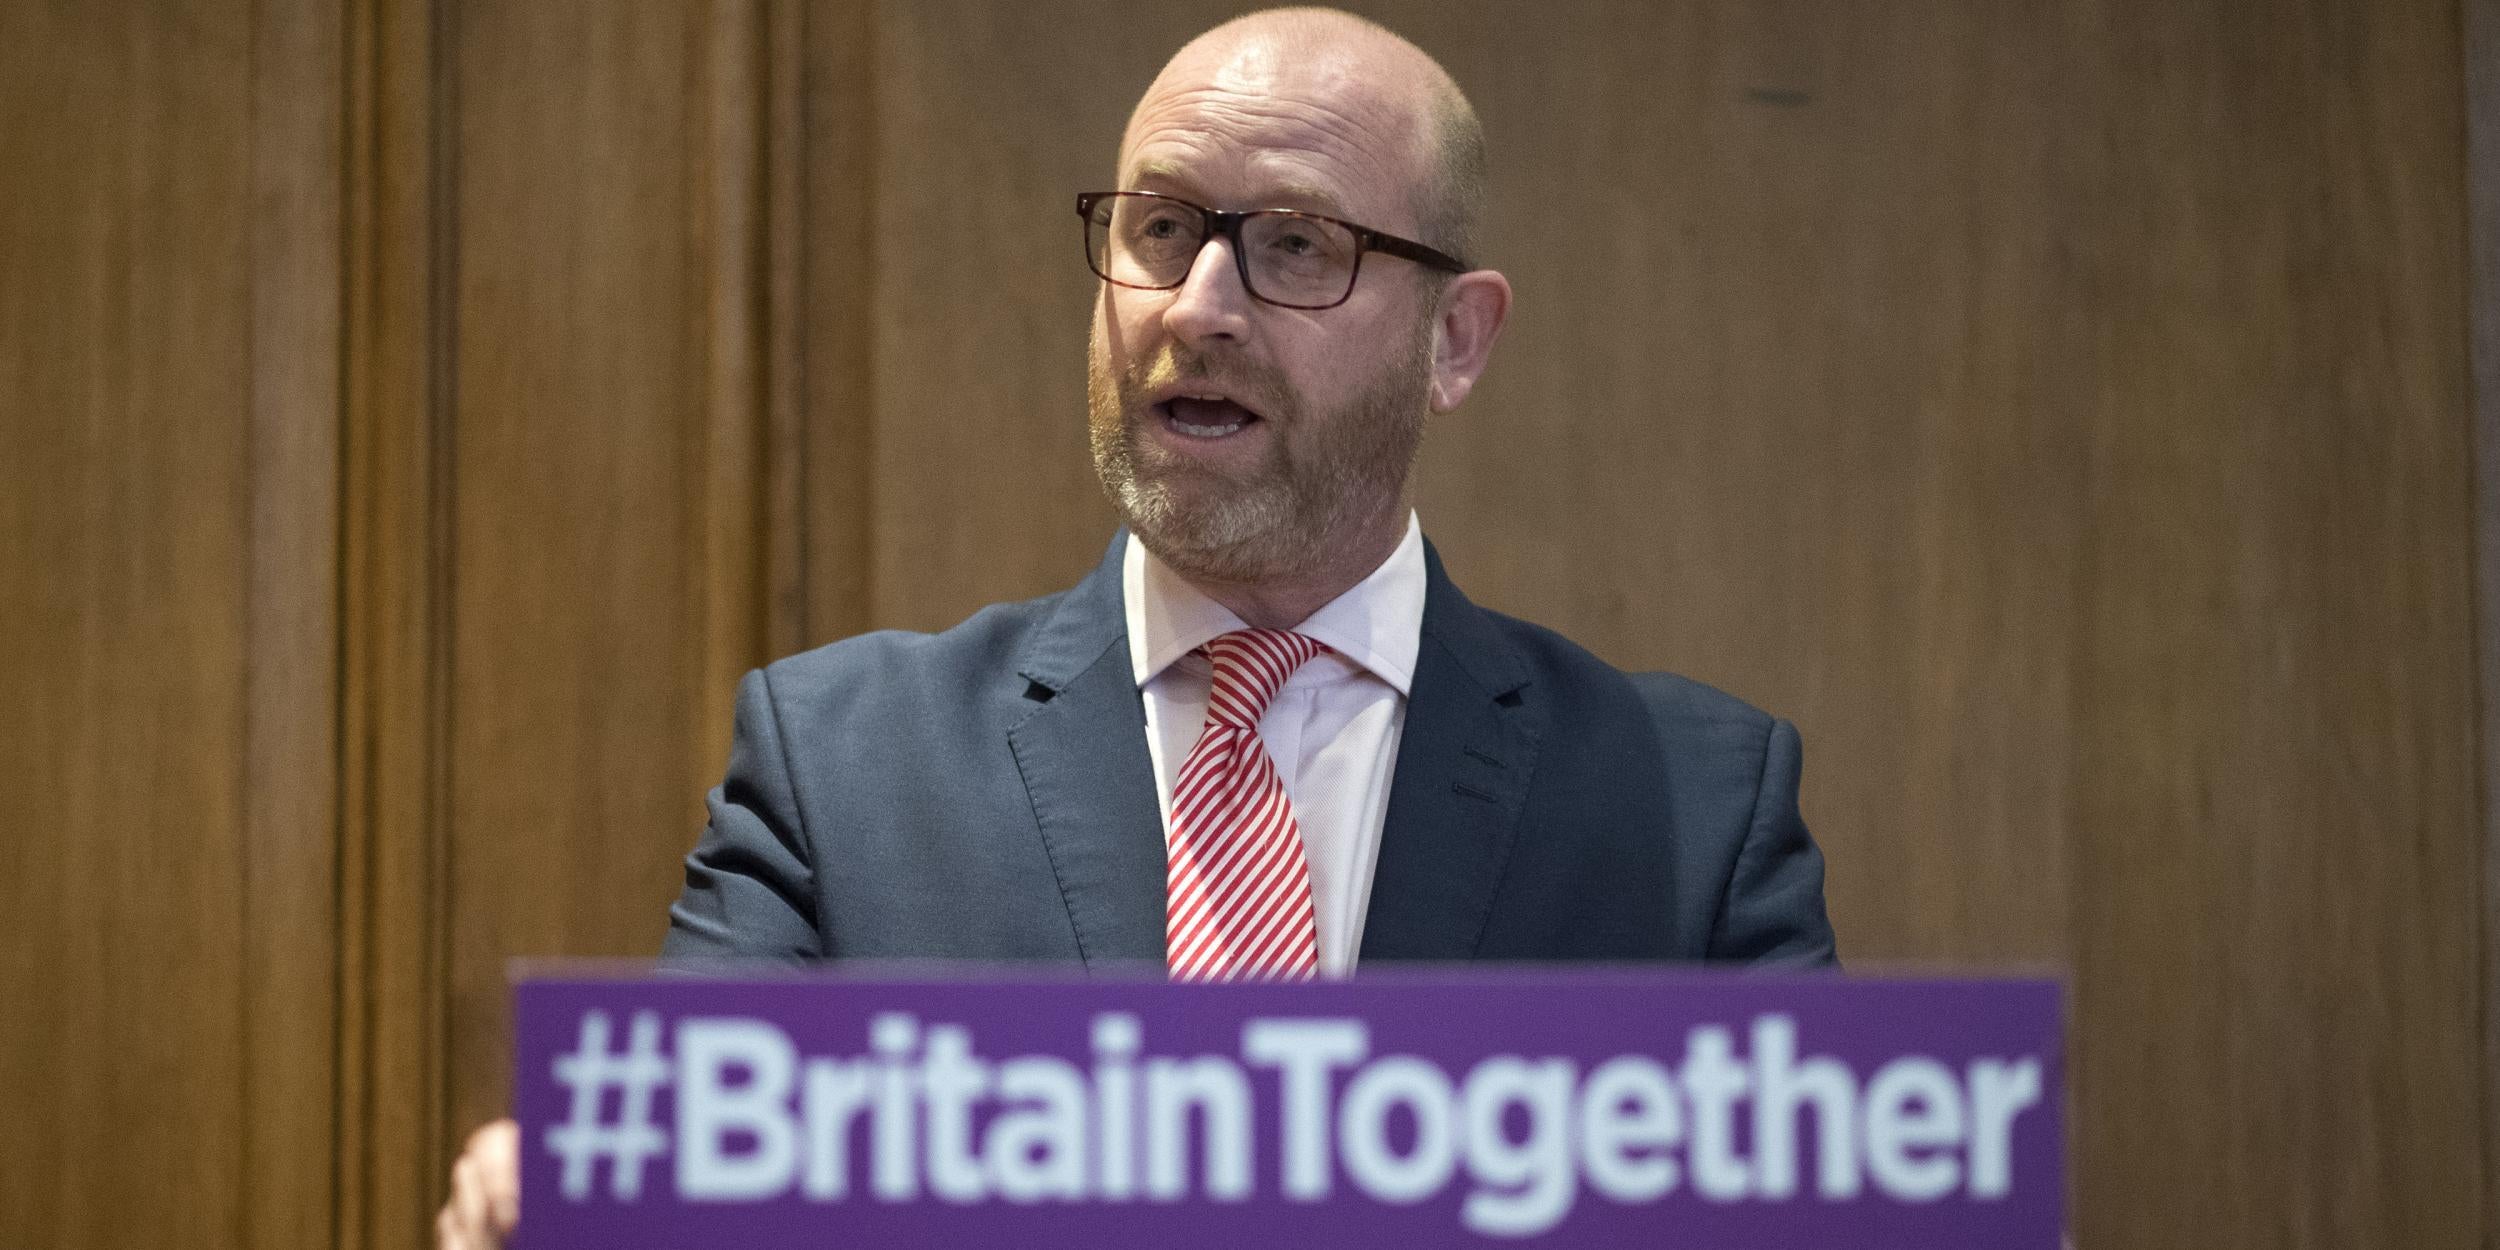 Paul Nuttall has said he will 'lead Ukip into battle' in the 2017 election